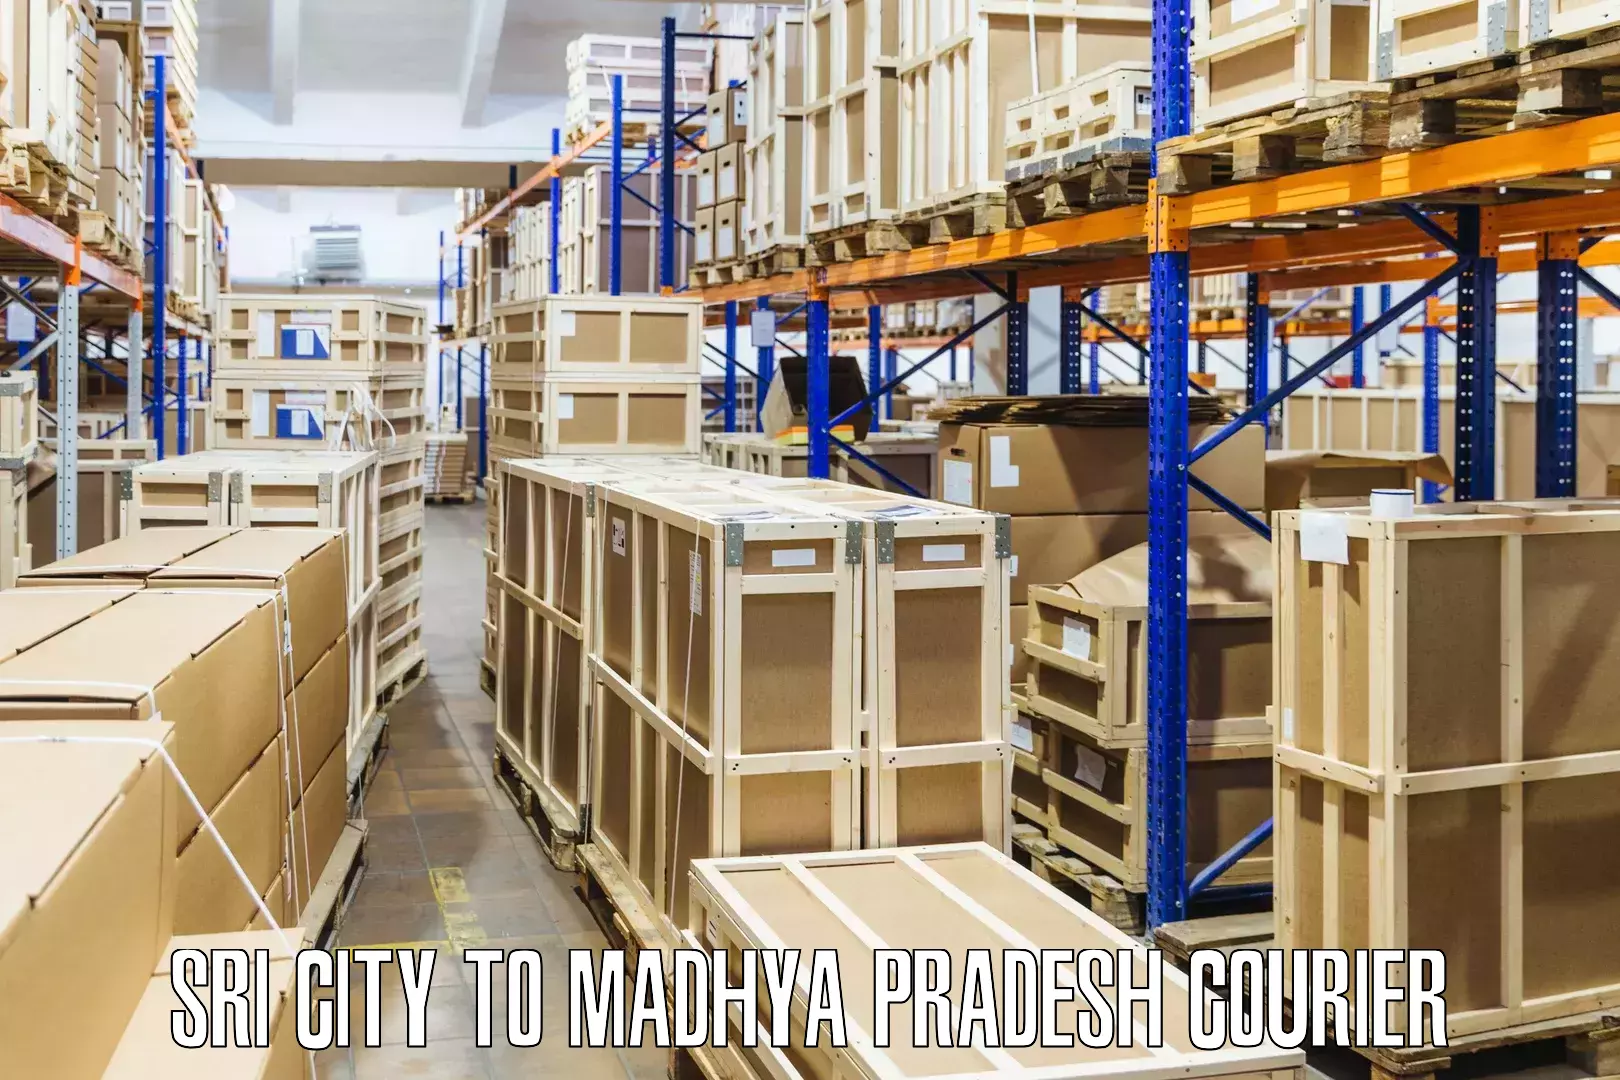 Express package delivery in Sri City to Manasa